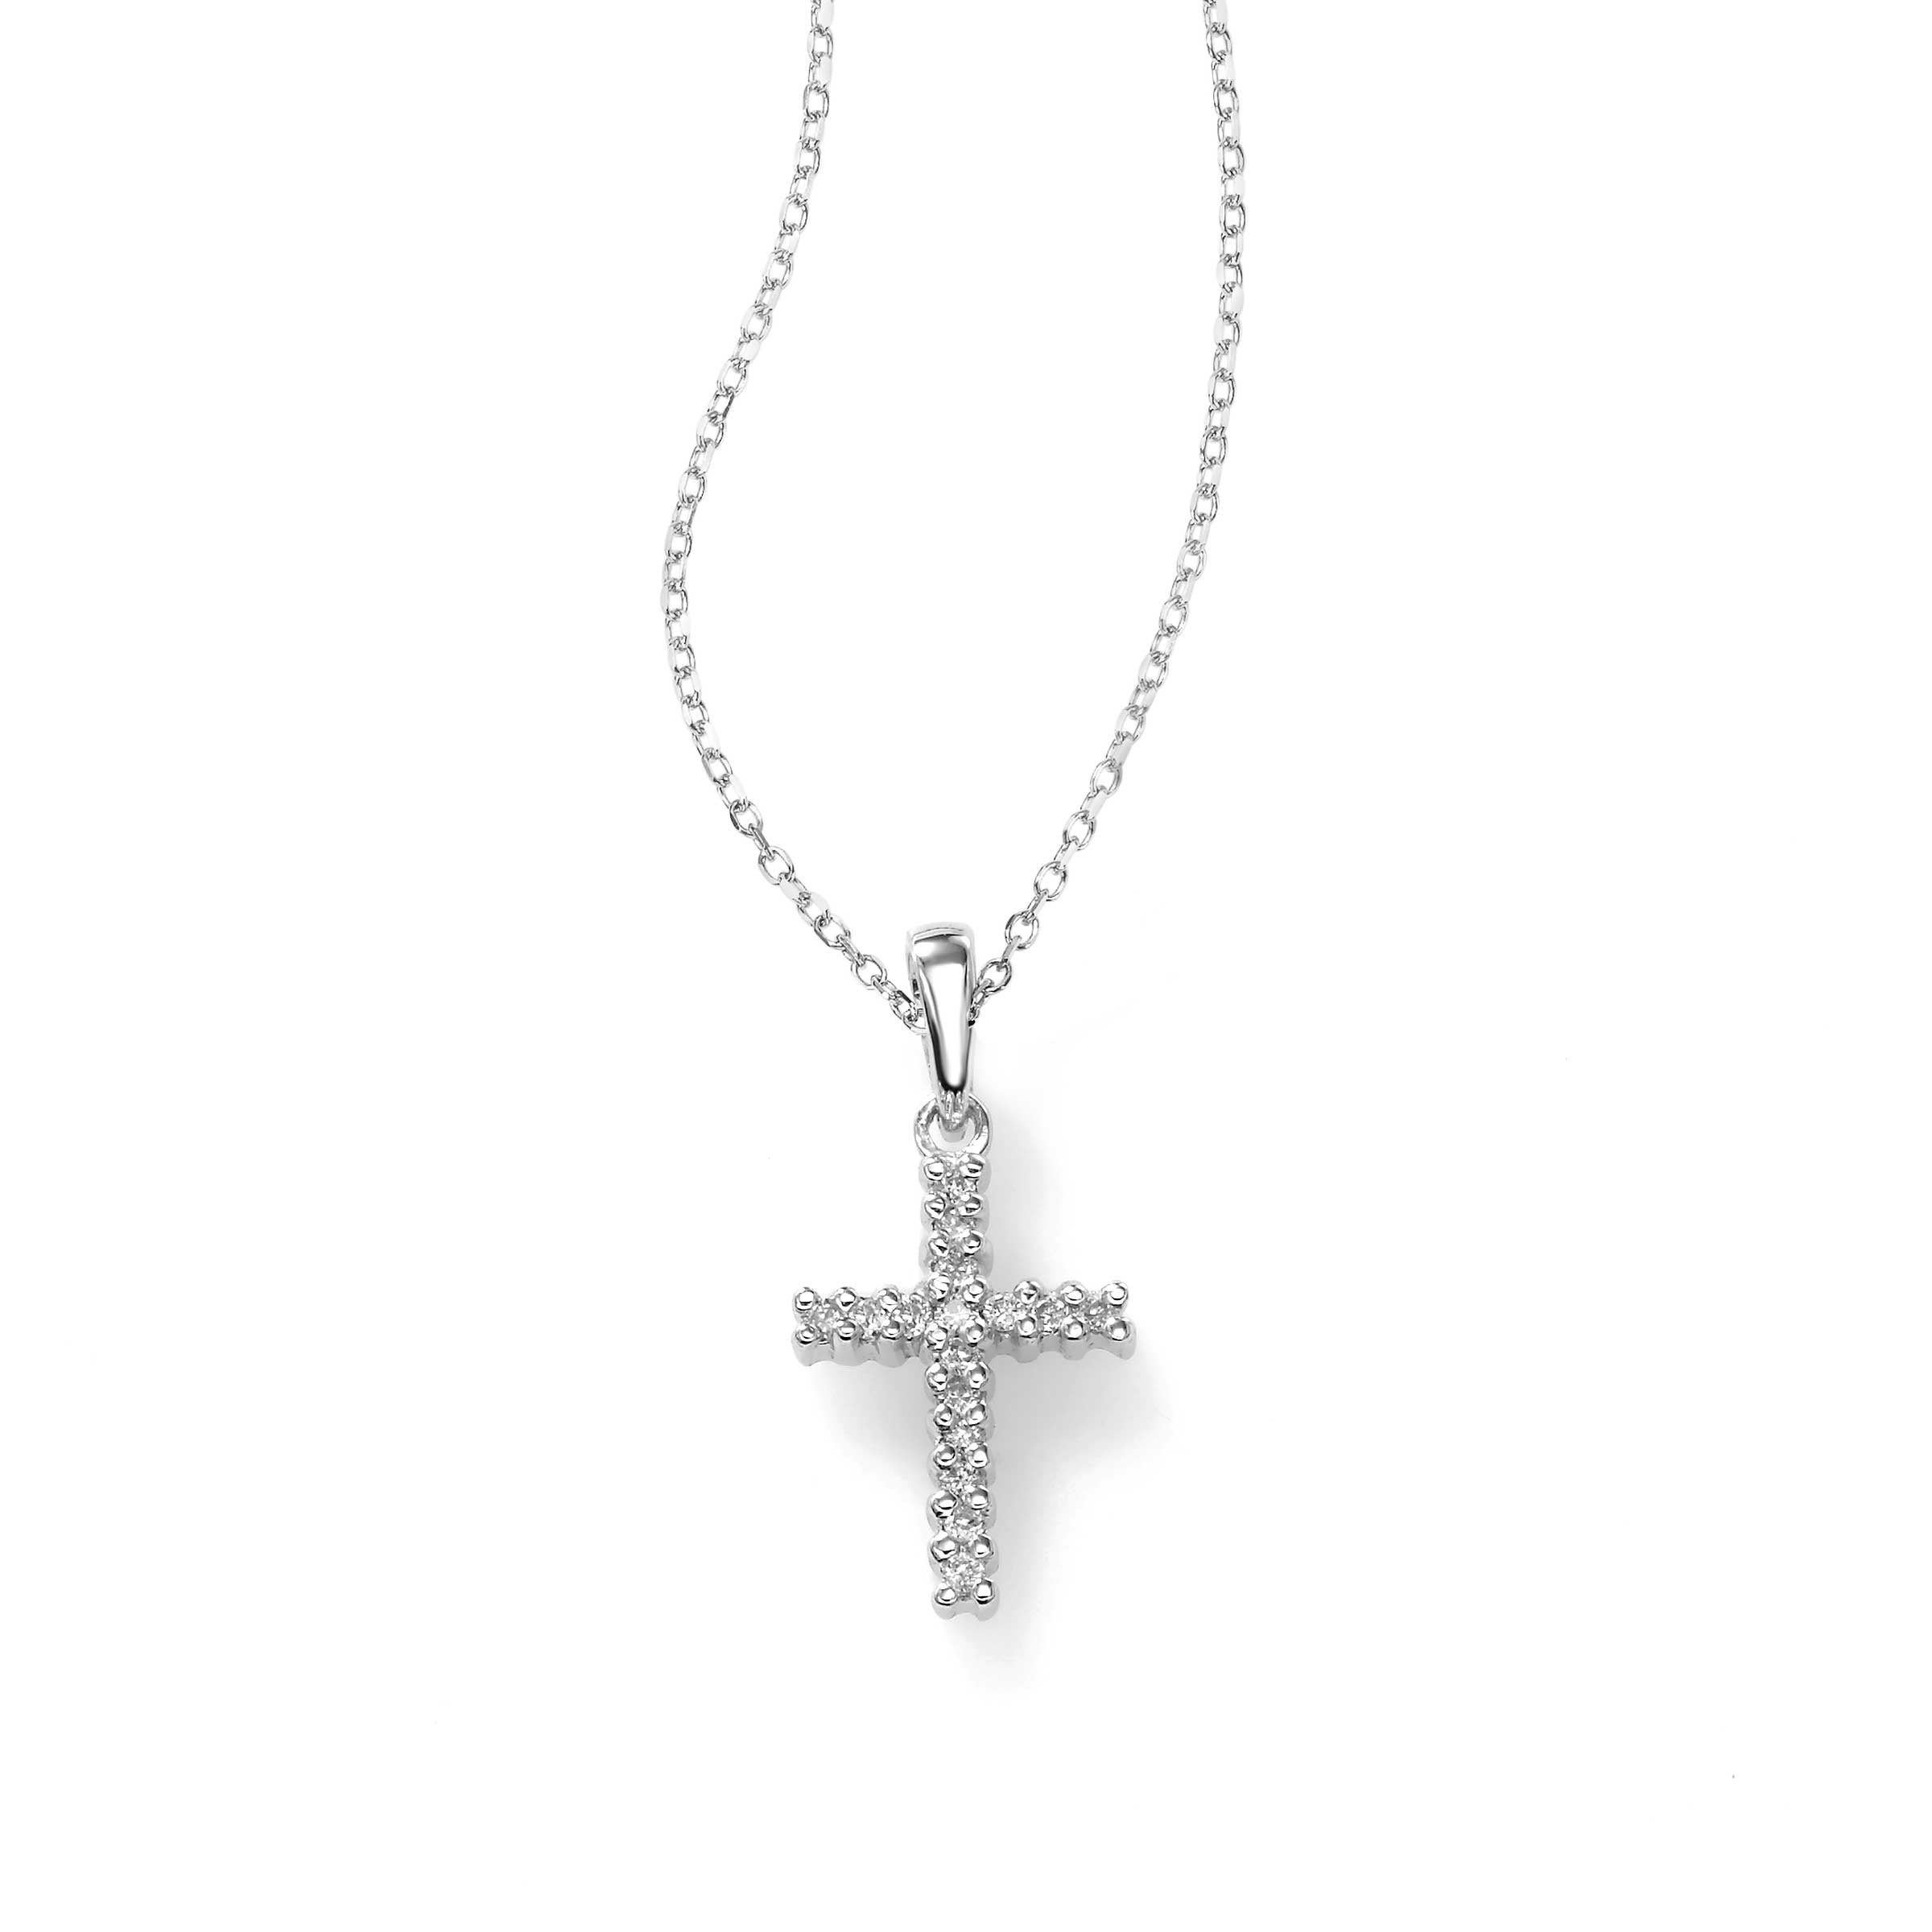 White Gold Diamond Cross Necklace for girls with 15